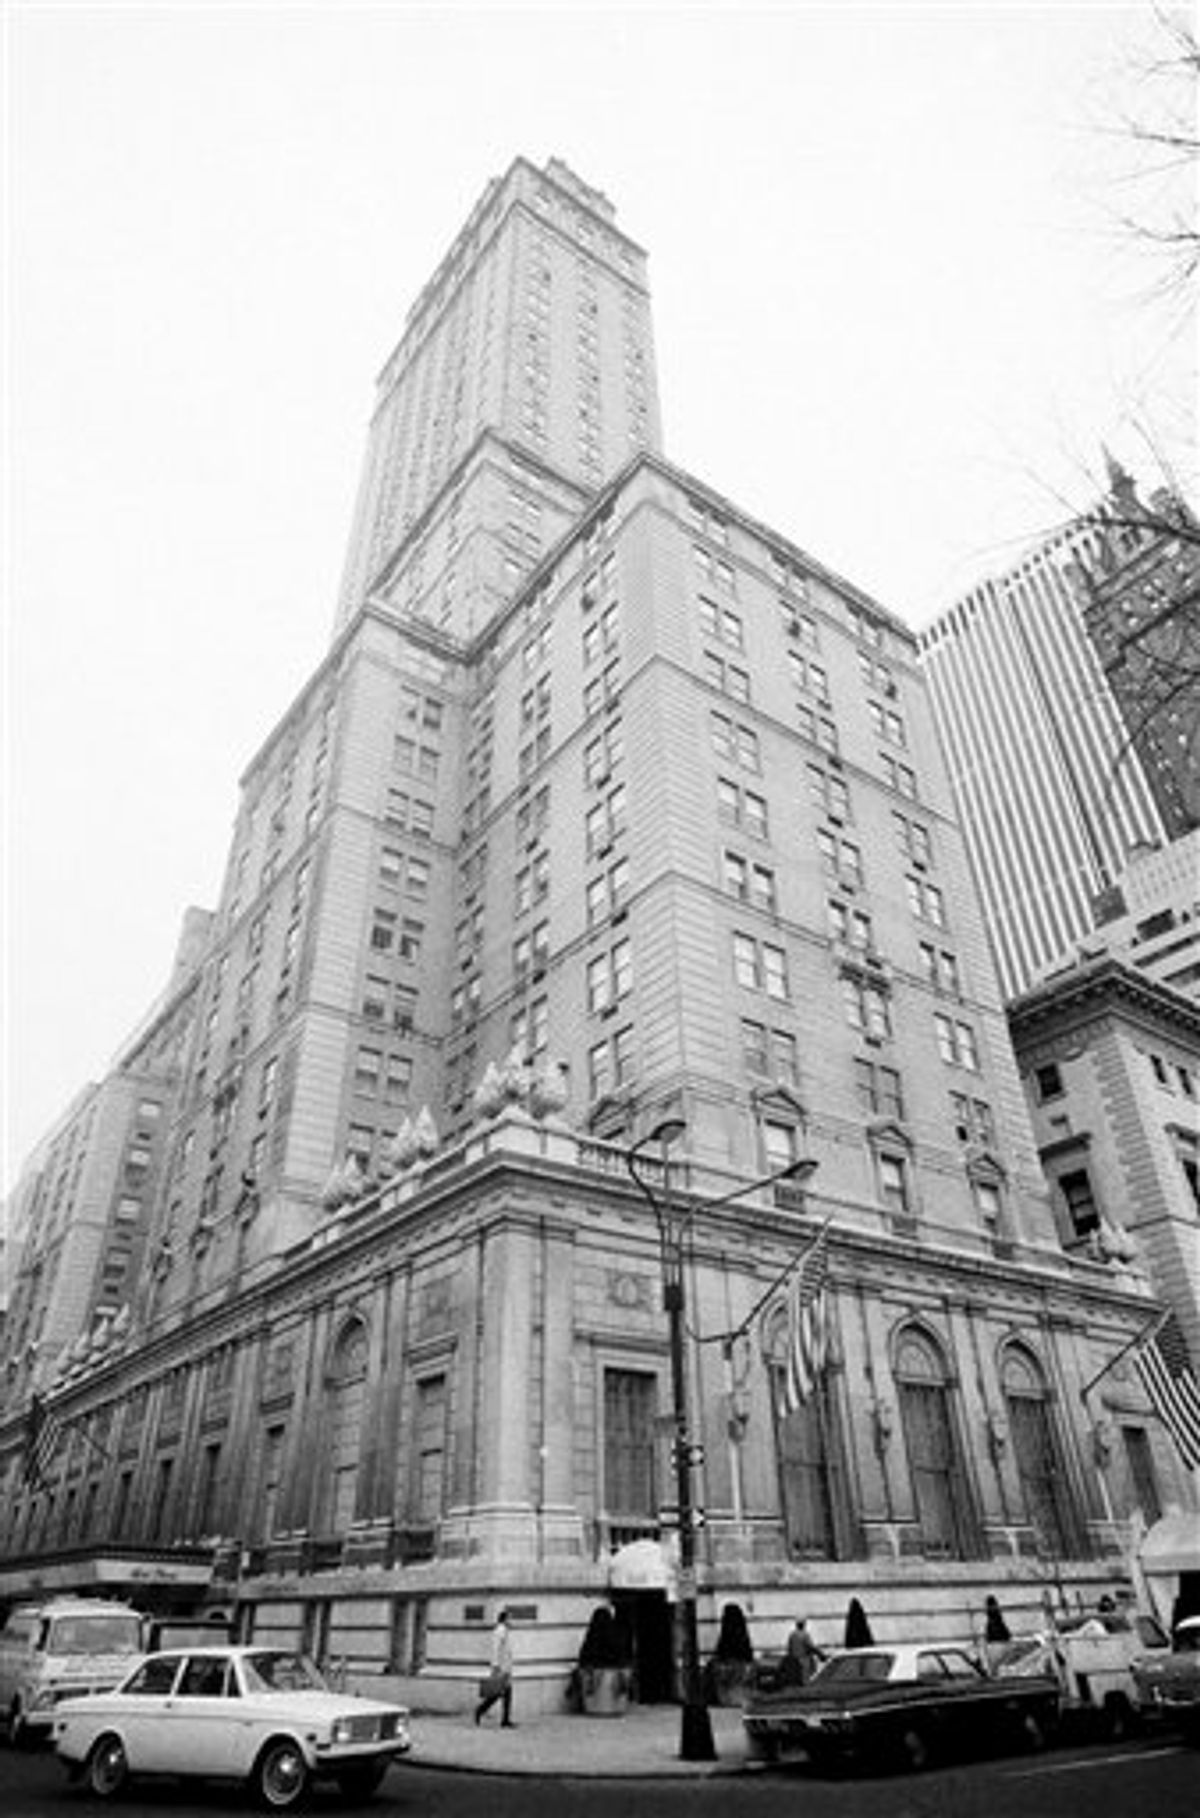 FILE - A Nov. 27, 1968 file photo shows the Exterior of the Pierre Hotel at 61st and 5th Avenue in New York.   Mahmoud Abdel Salam Omar, former chairman of Egypt's Bank of Alexandria and durrently an executive with El-MexSalines Co., was arrested Monday, May 31, 2011, on charges of sexually abusing a maid at The Pierre hotel,(AP Photo) (AP)